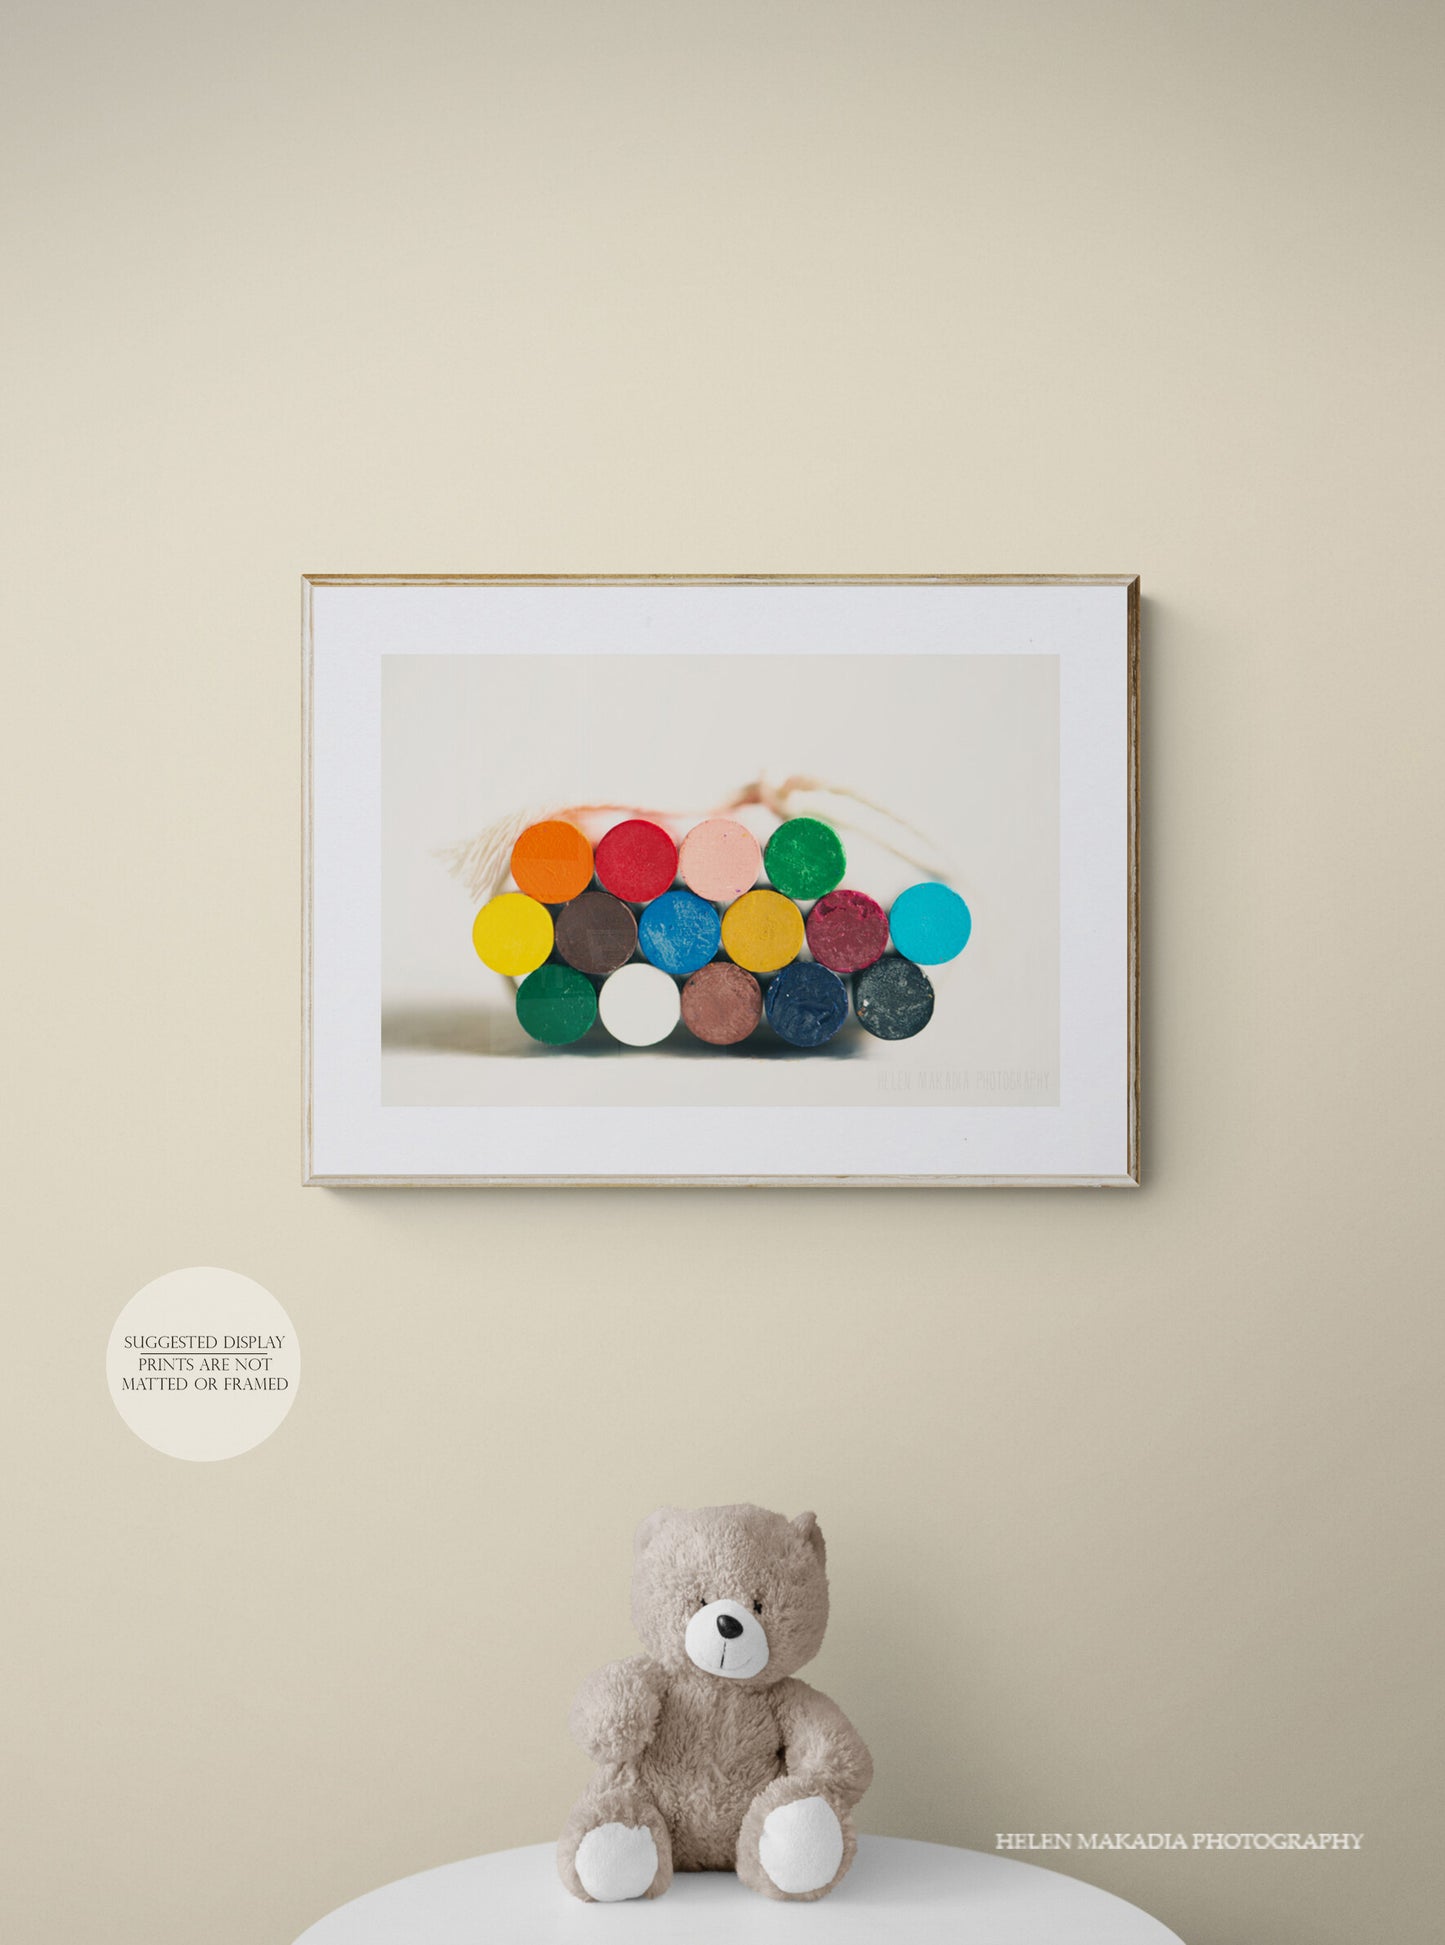 A Photograph of a Bundle of Crayons Ends as wall art in a playroom